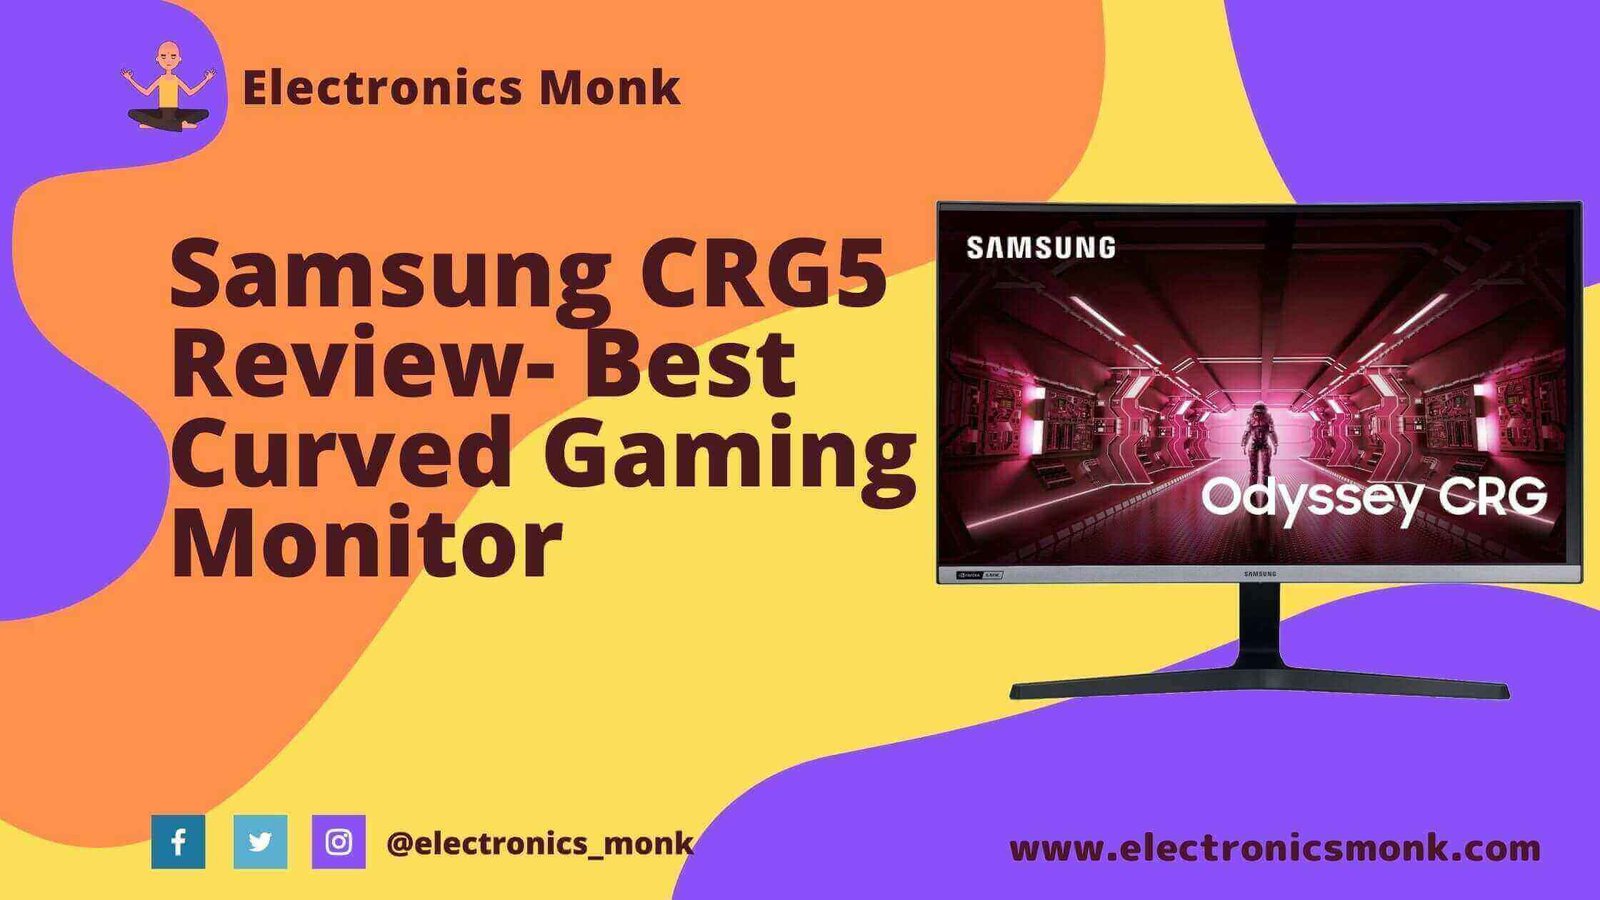 Samsung CRG5 Review - Best Curved Gaming Monitor